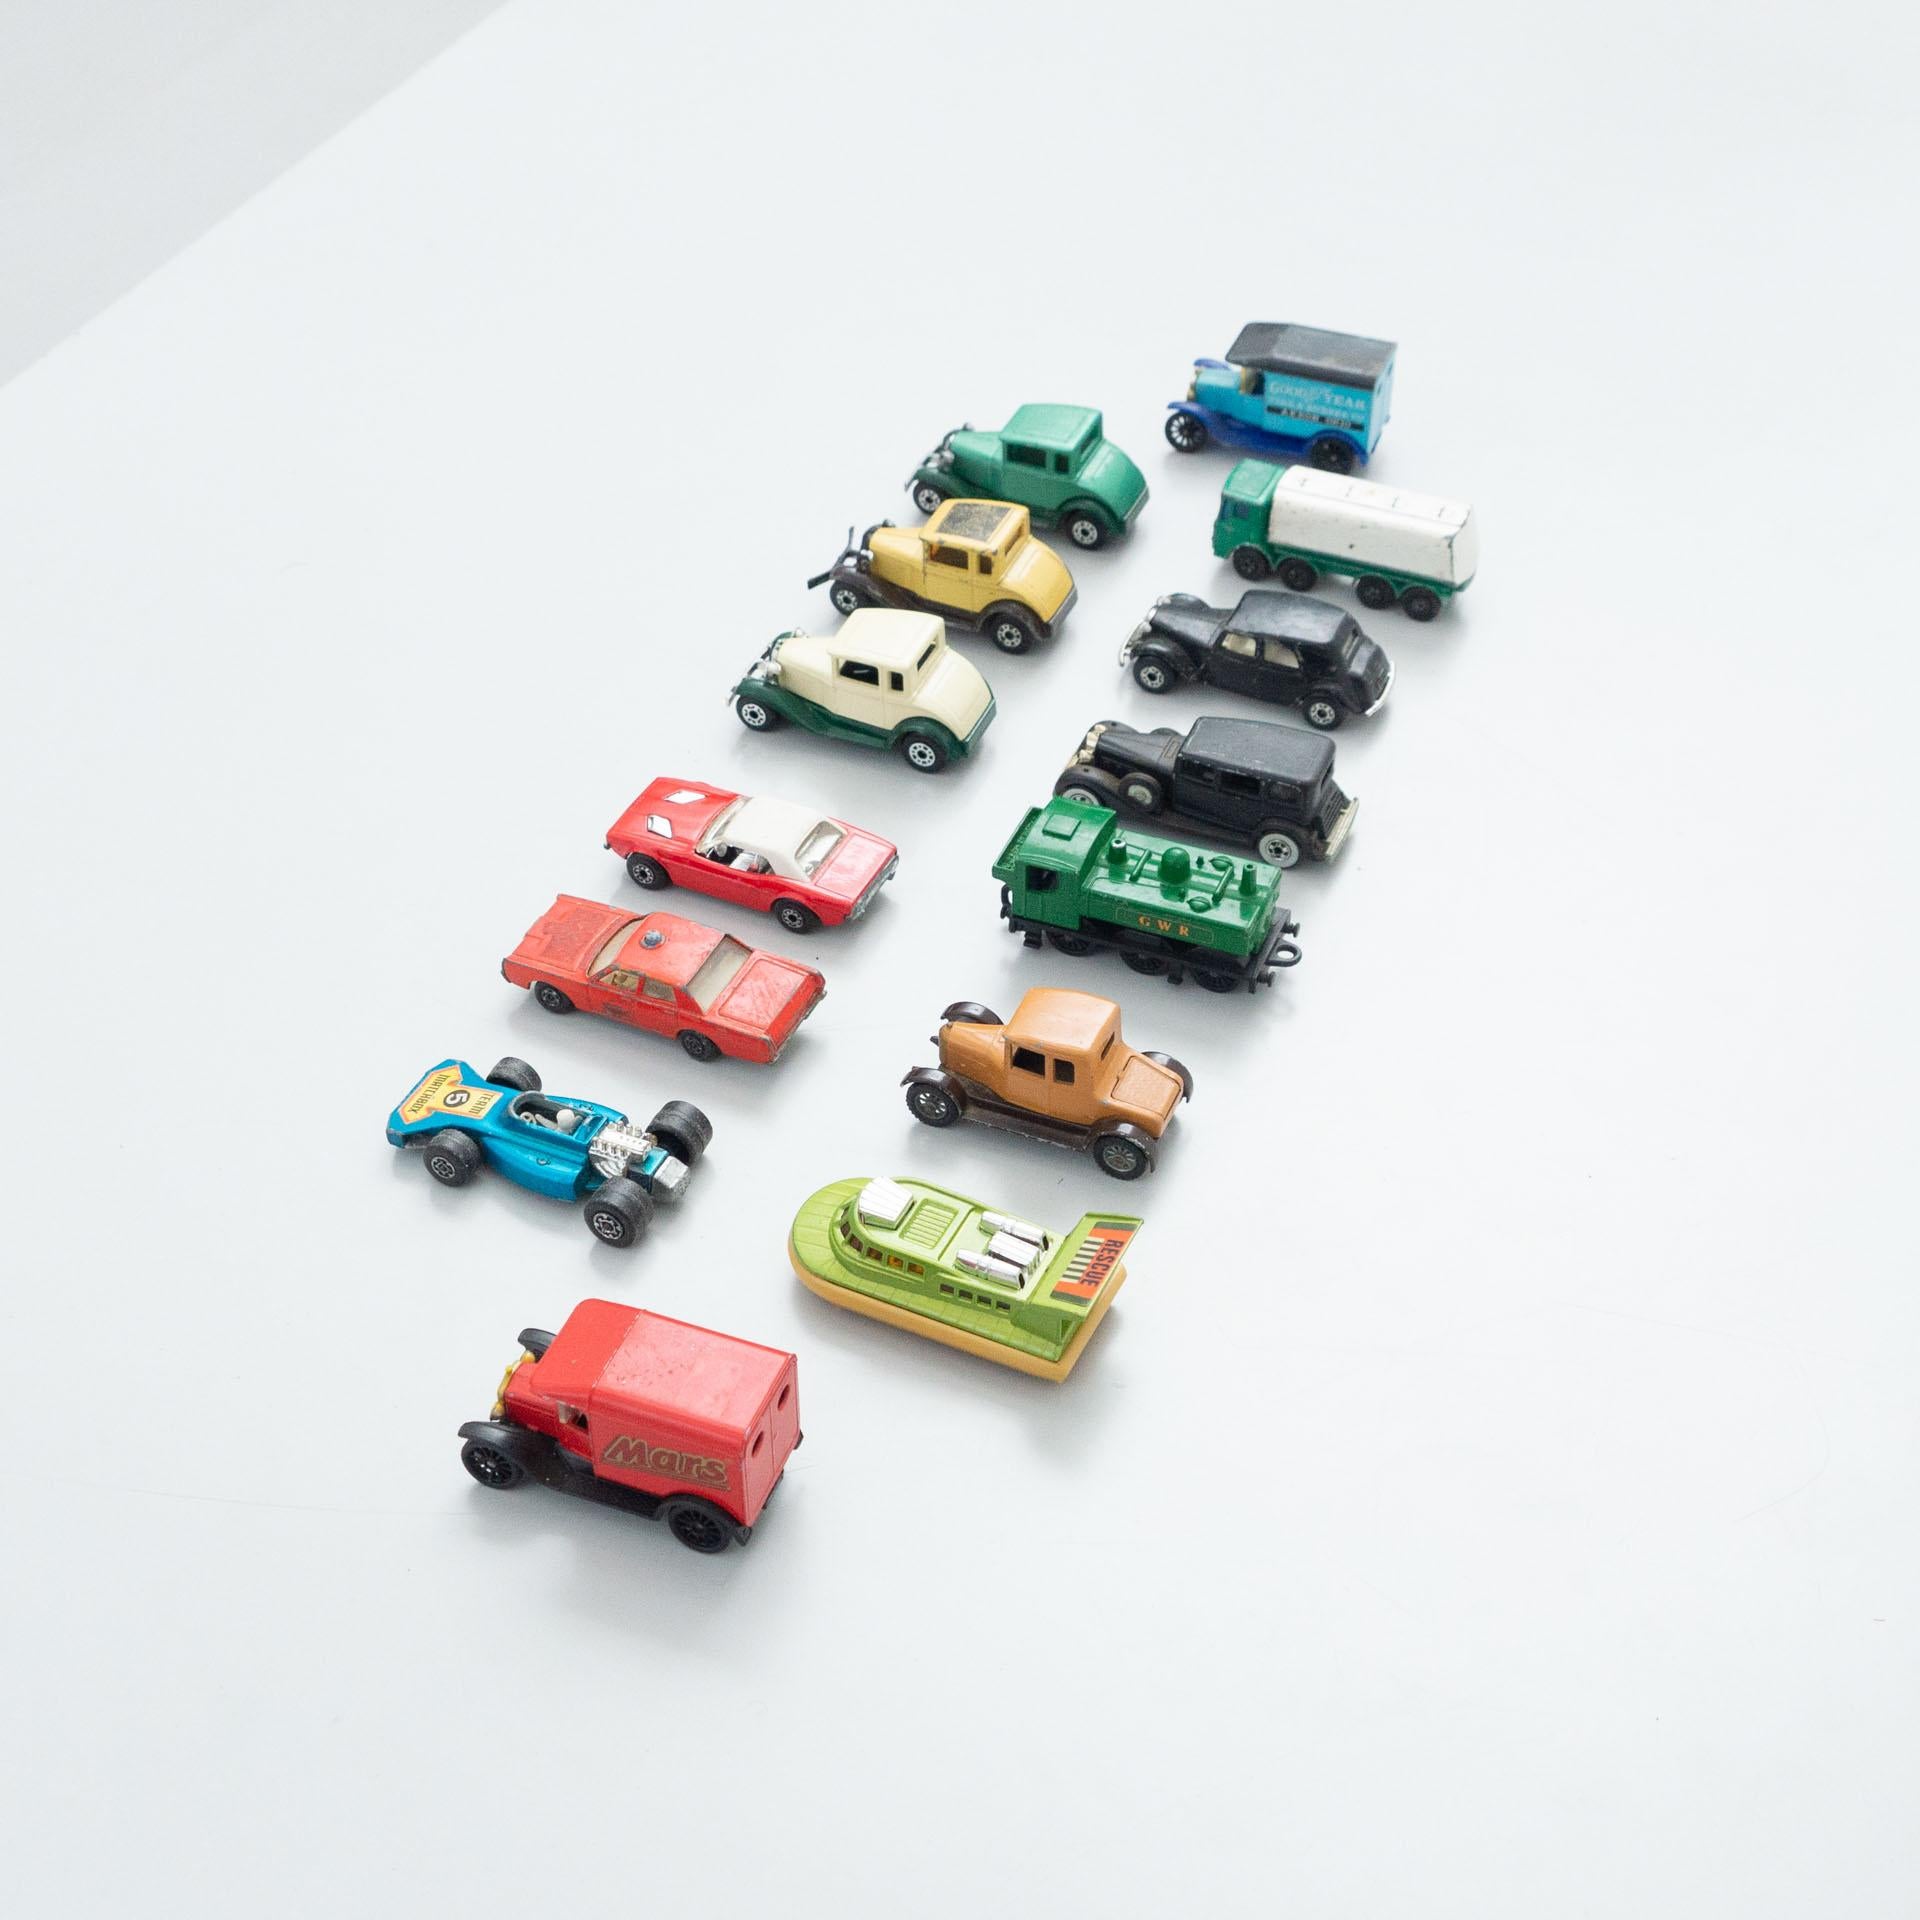 Set of fourteen vintage matchbox toy cars.
By Unknown manufacturer, circa 1960.

In original condition, with minor wear consistent with age and use, preserving a beautiful patina.

Materials:
Metal
Plastic

Dimensions (each one):
D 7.5 cm